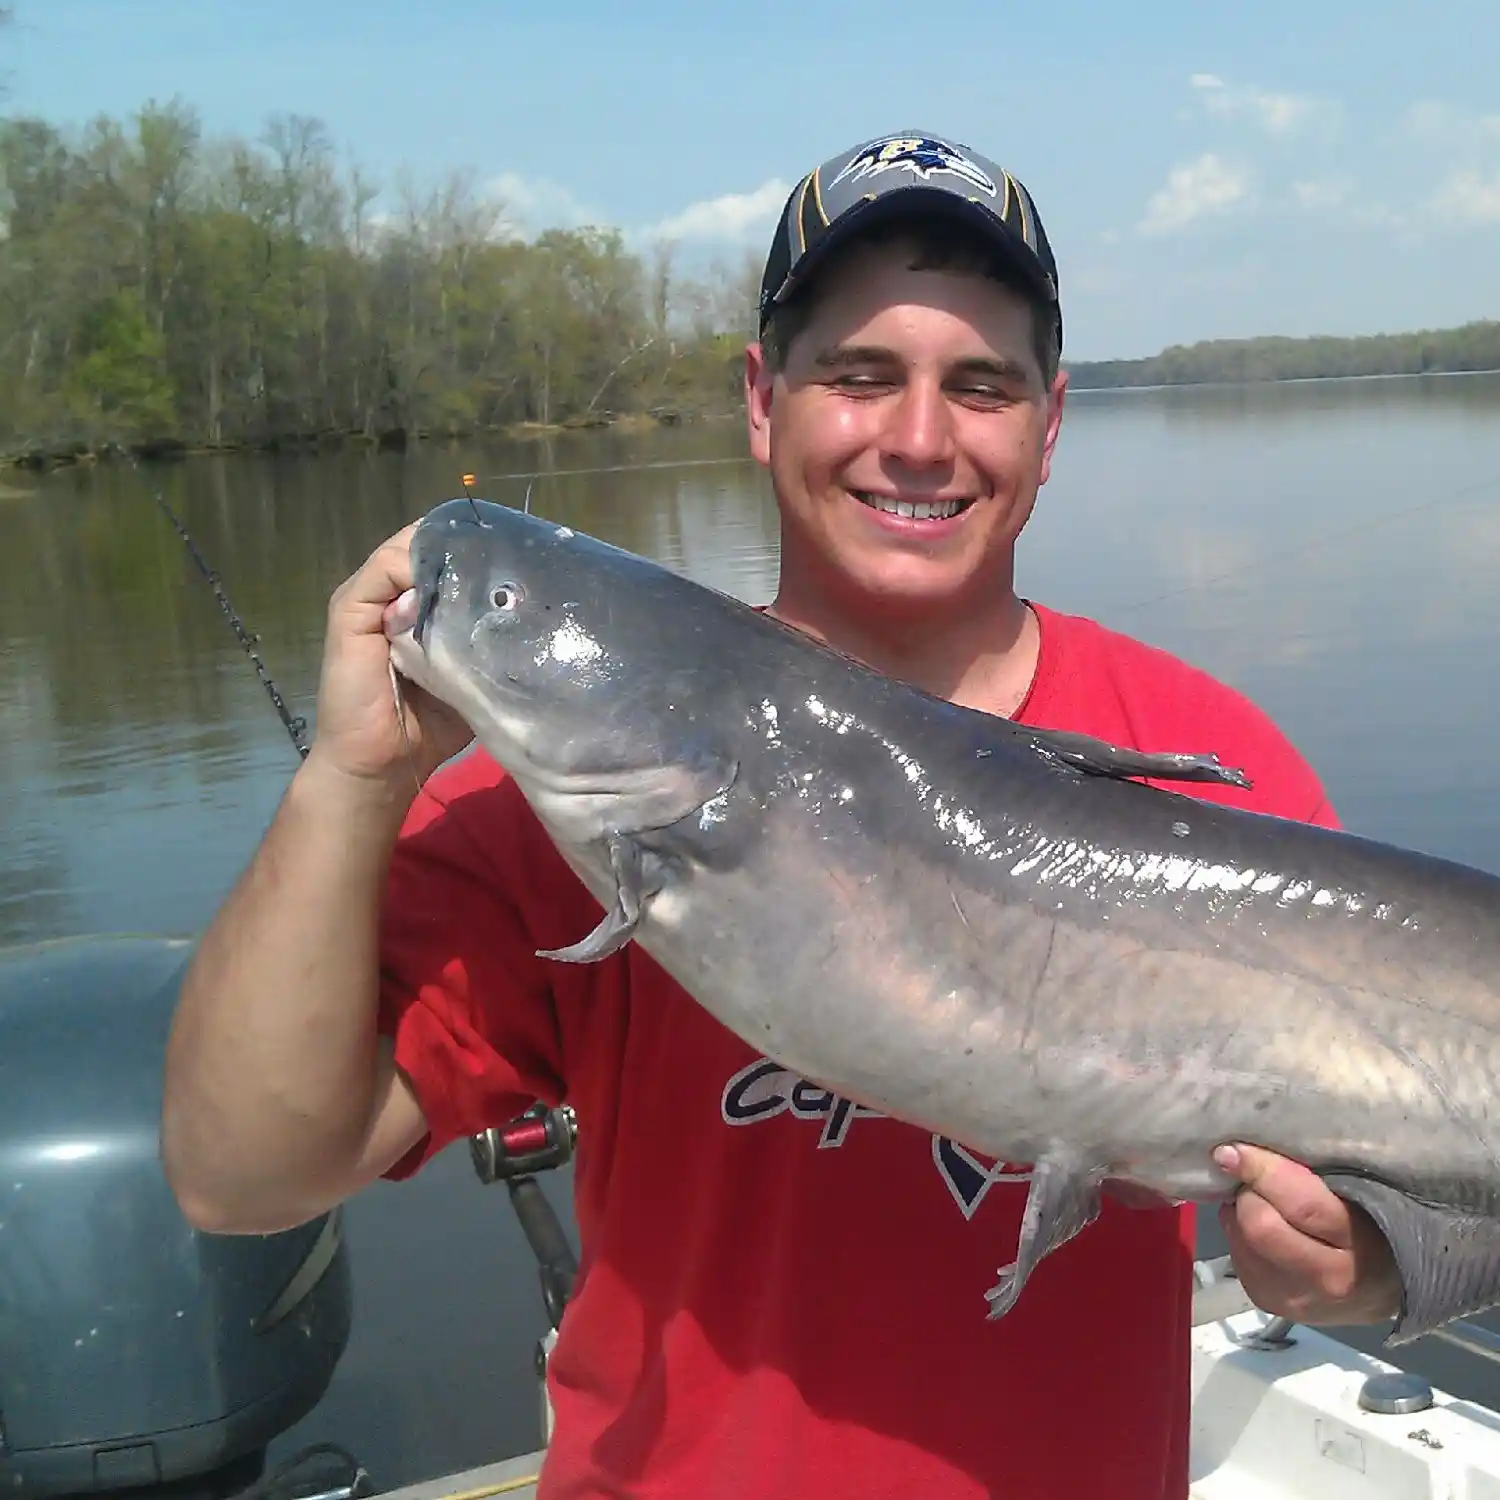 Search James%20river%20catfishing Fishing Videos on